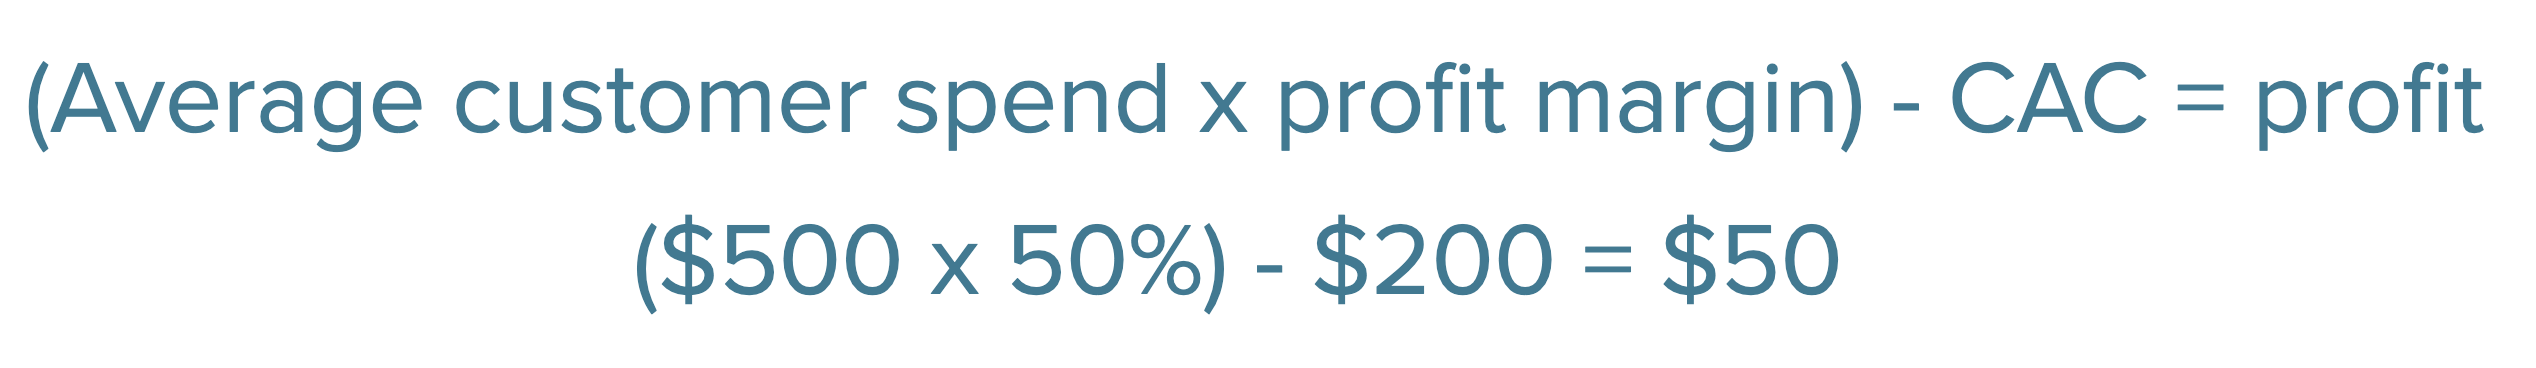 Formula for calculating profits (Average customer spend 500 USD times 50%, minus the 200 USD CAC earlier calculated leaves 50 USD profit)